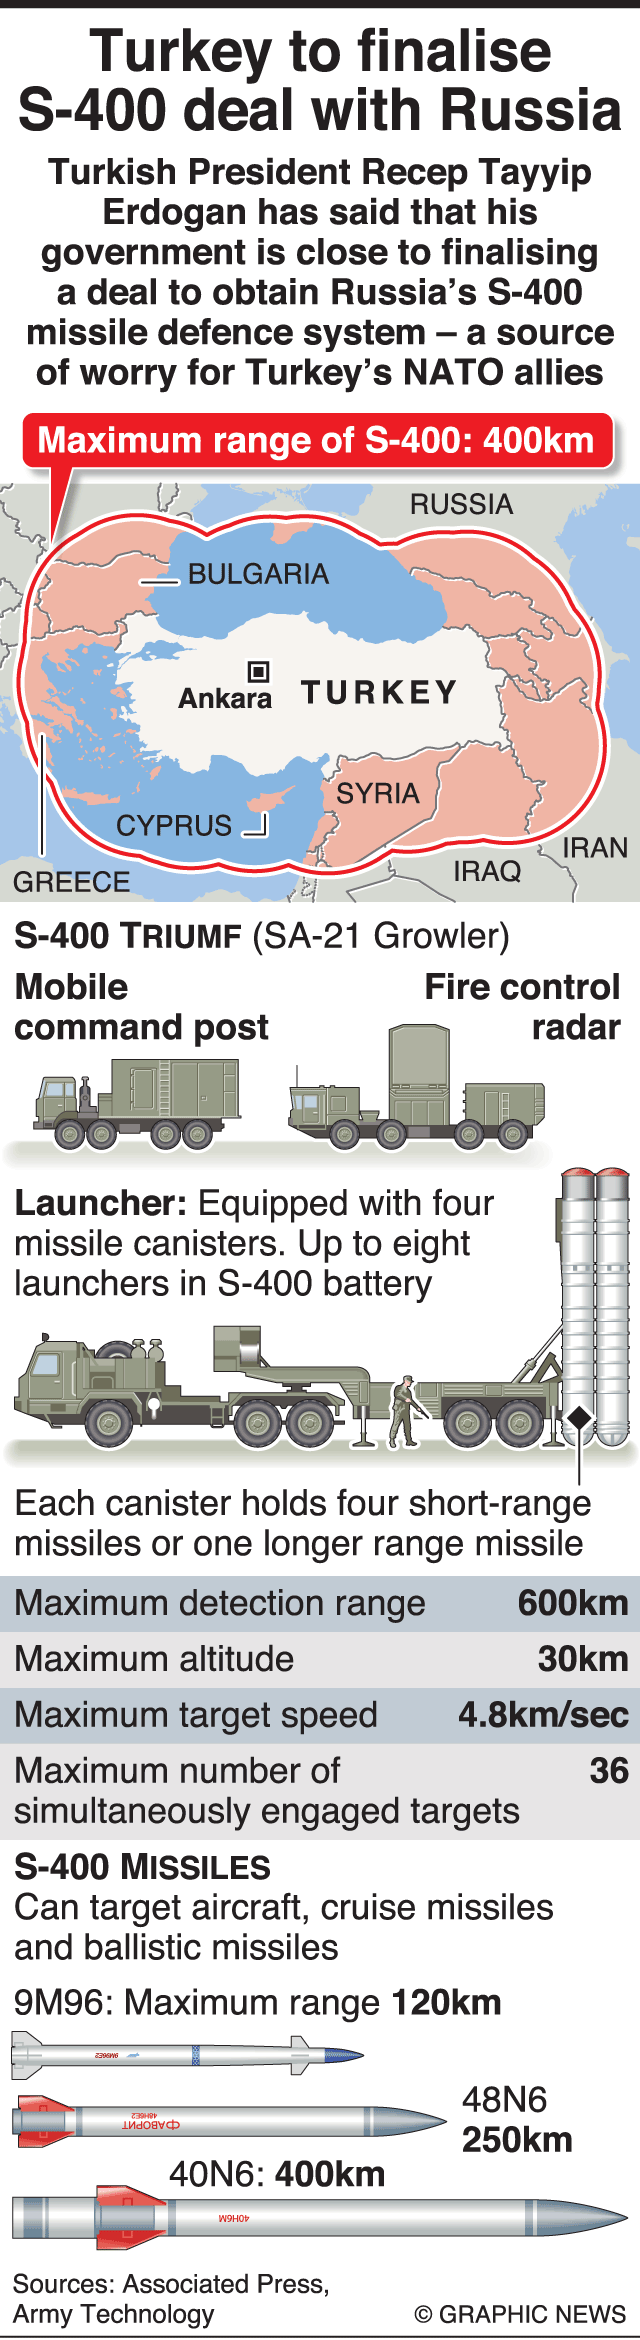 Russian S-400 defense system purchase done deal: Turkey